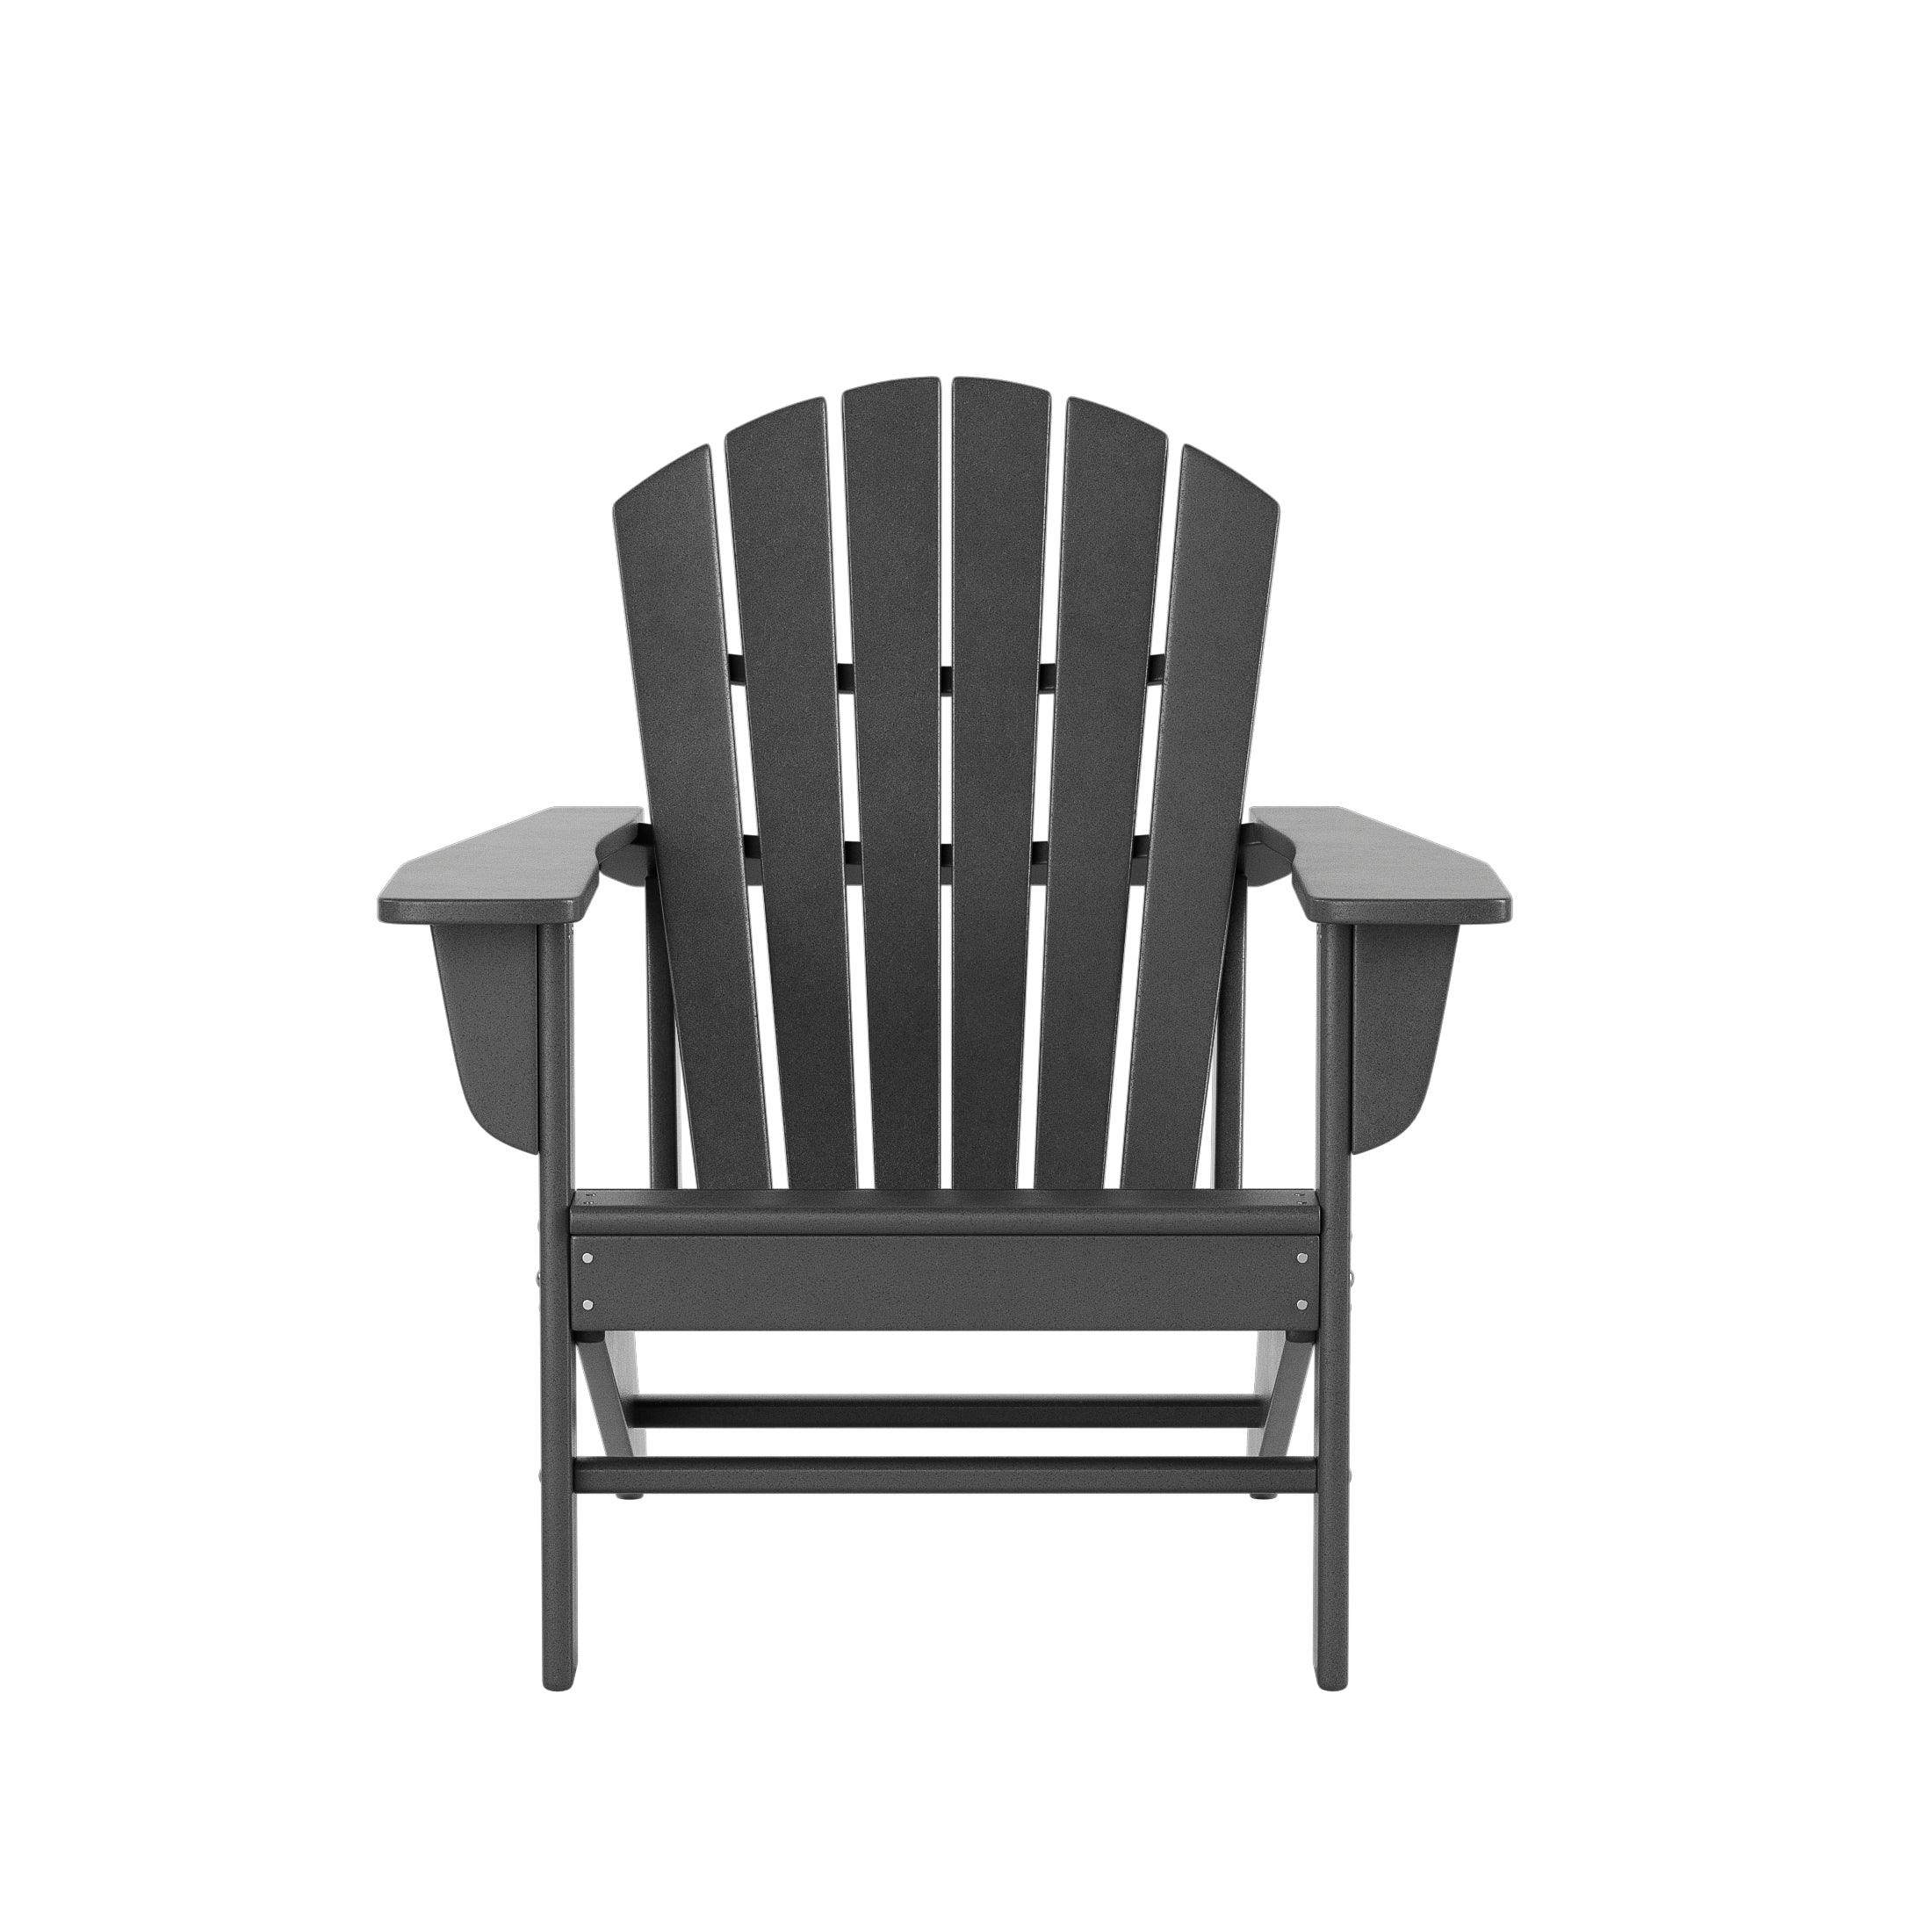 Costaelm Outdoor Adirondack Chair With Ottoman 2-Piece Set, Gray